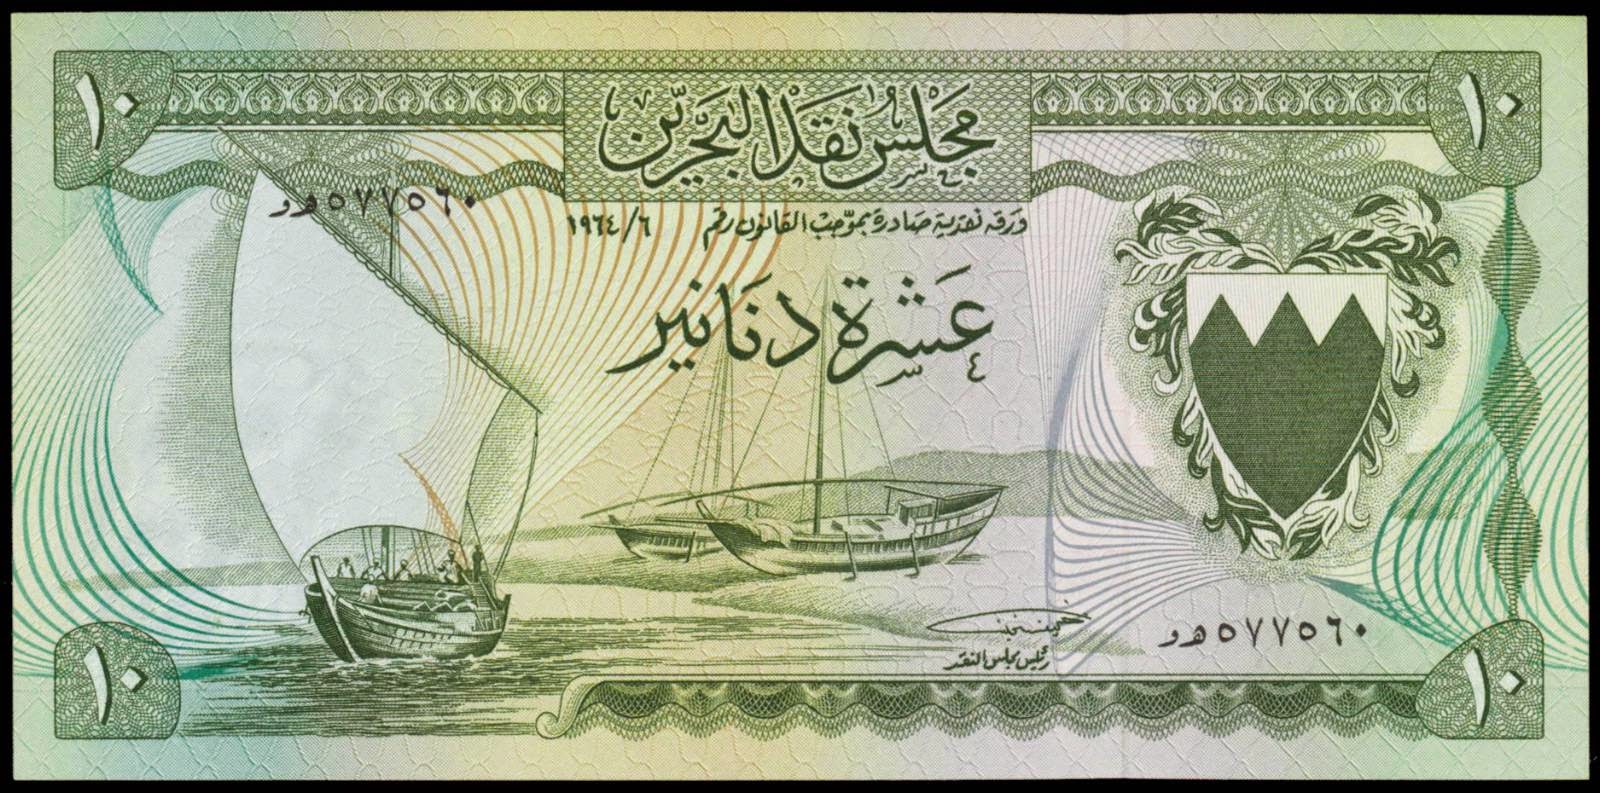 Bahrain Currency 10 Dinars banknote 1965